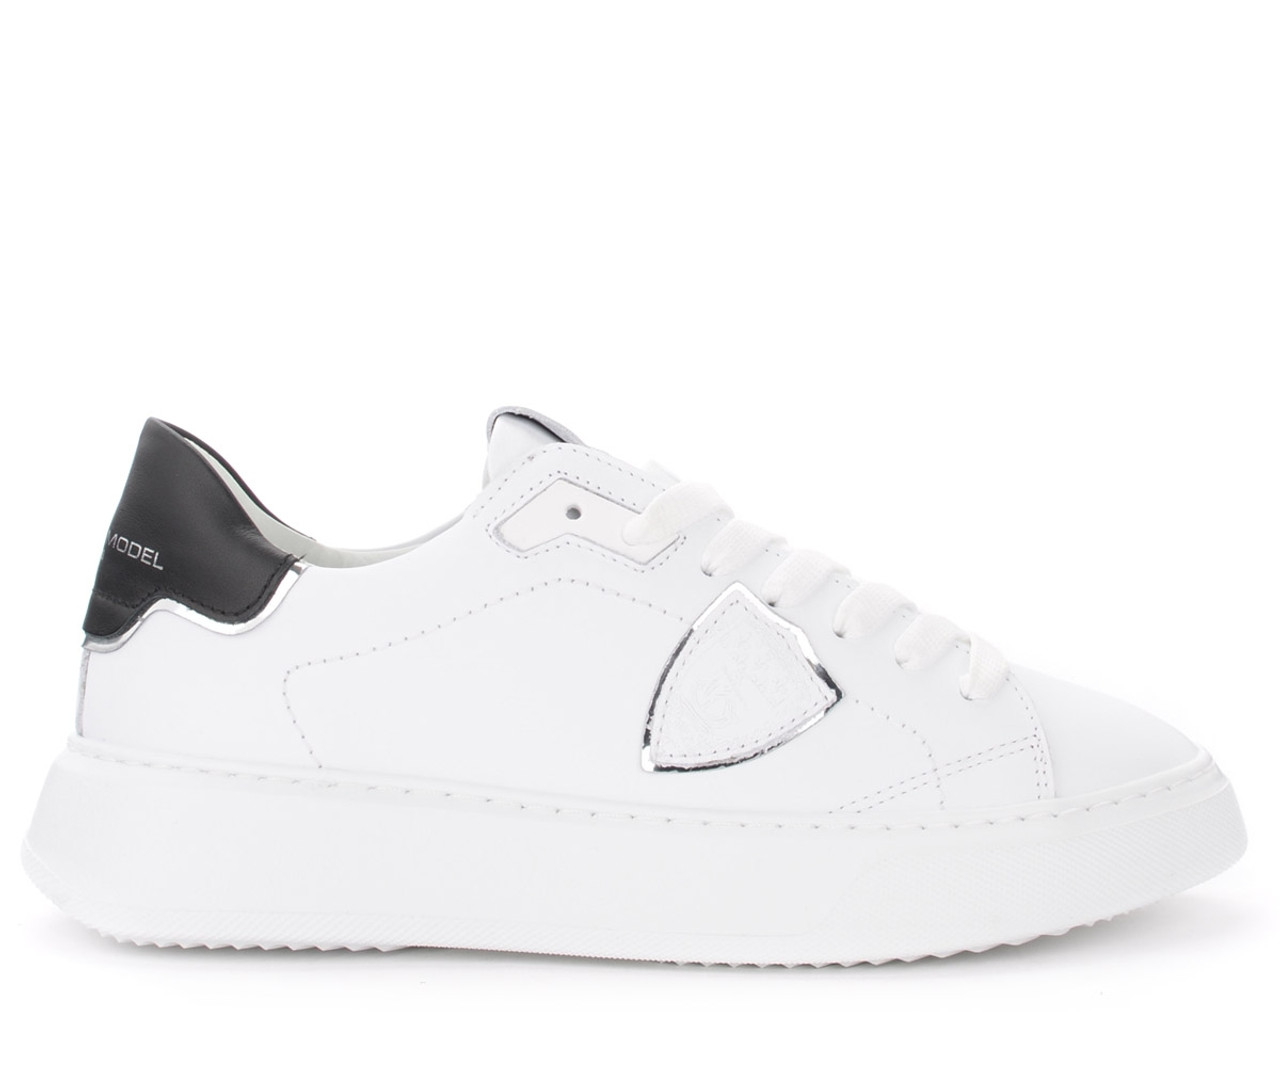 Sneaker Philippe Model Temple in white leather with black and